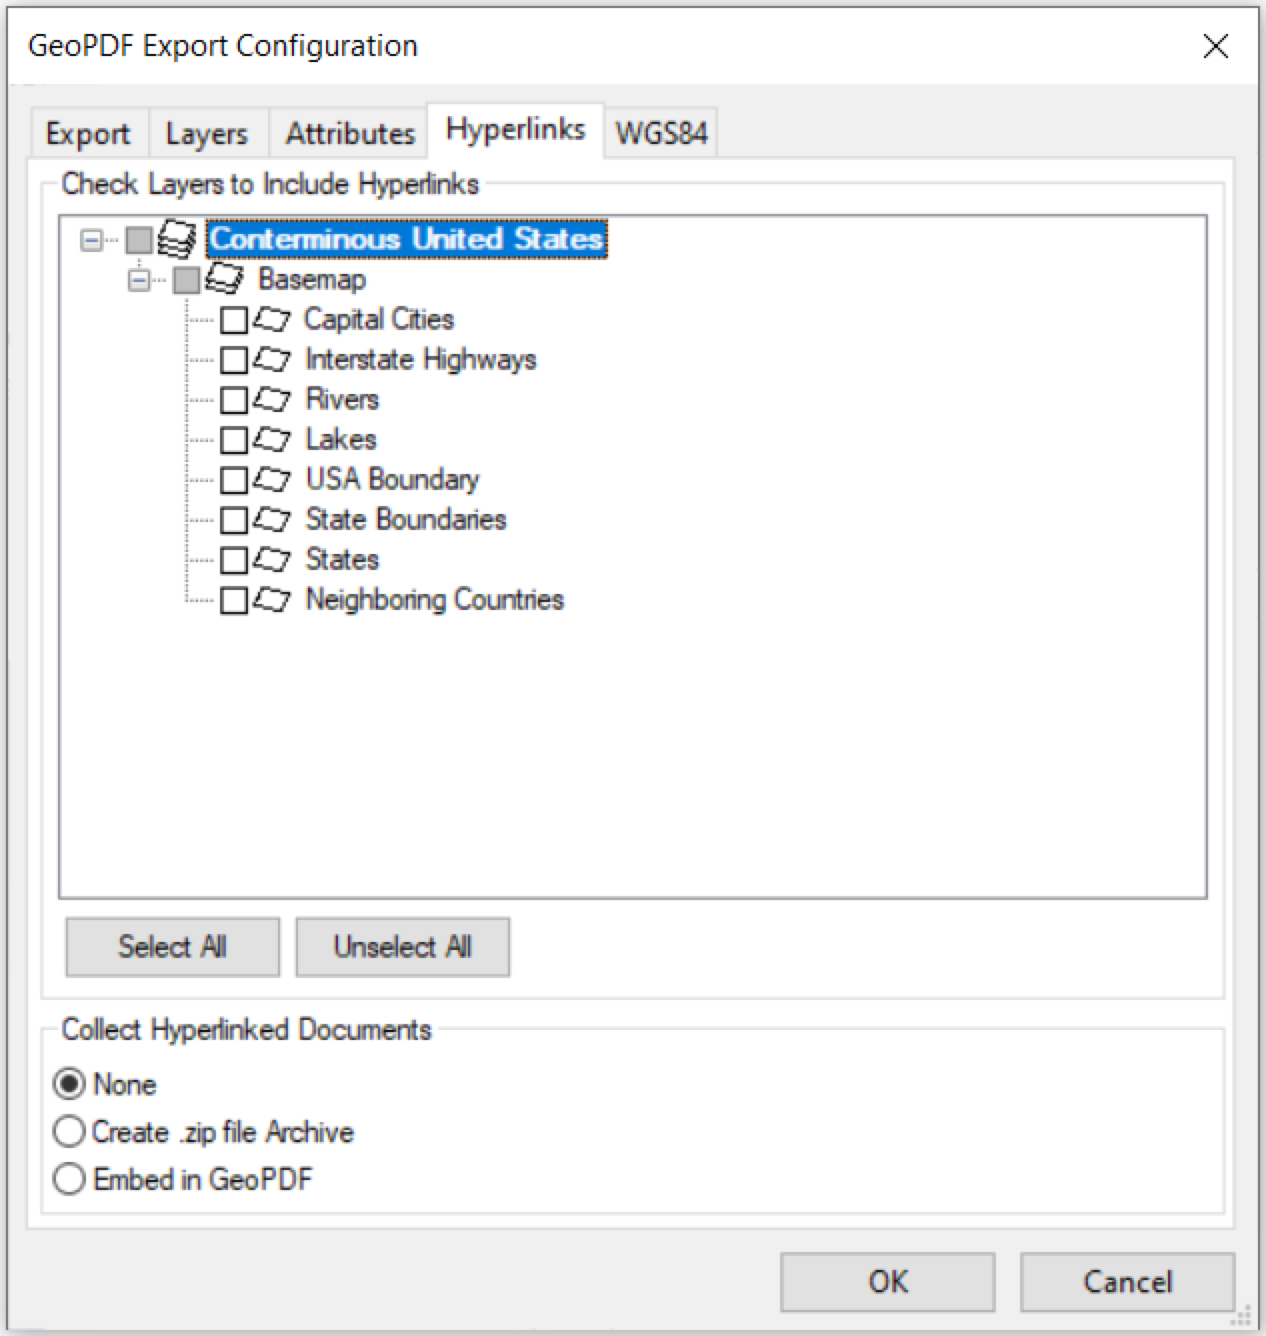 The Hyperlinks tab of the Export Configuration dialog box